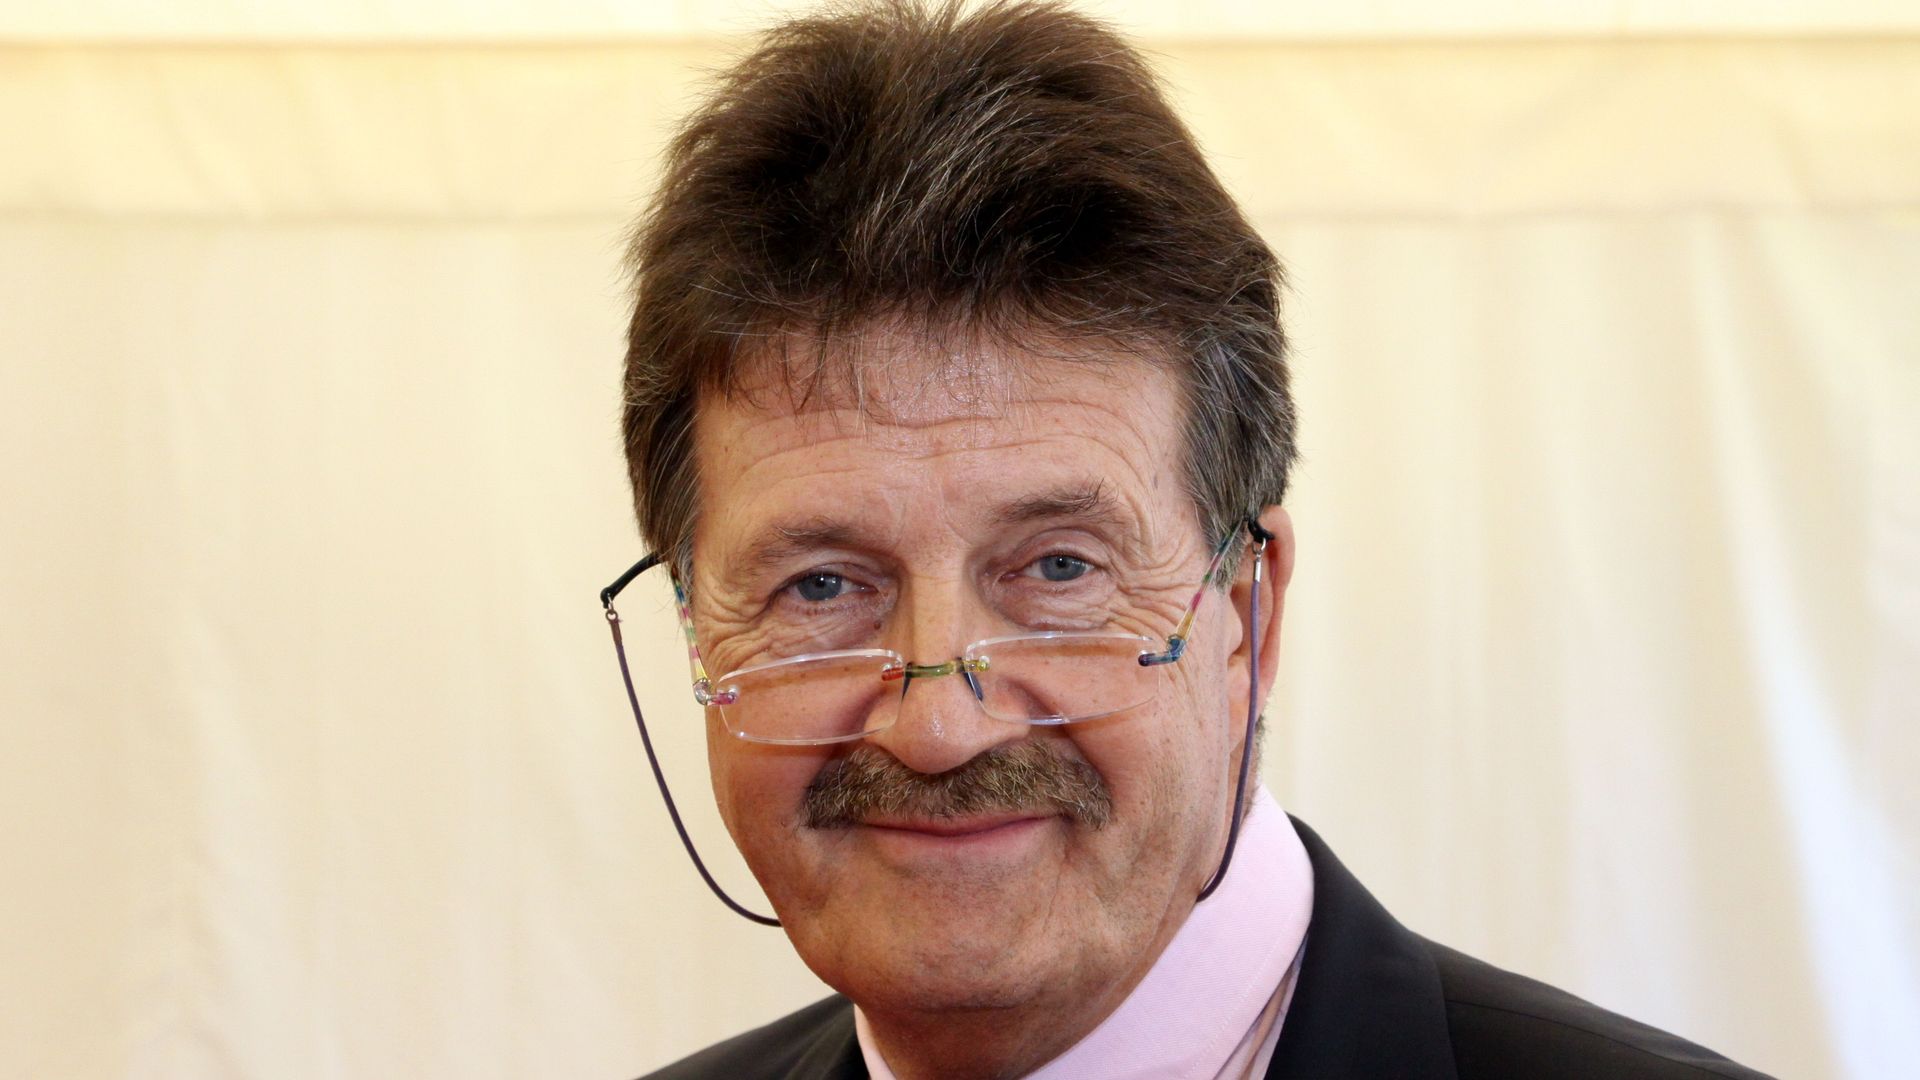 Bargain Hunt's Tim Wonnacott: Why presenter quit show after 12 years and where he is now